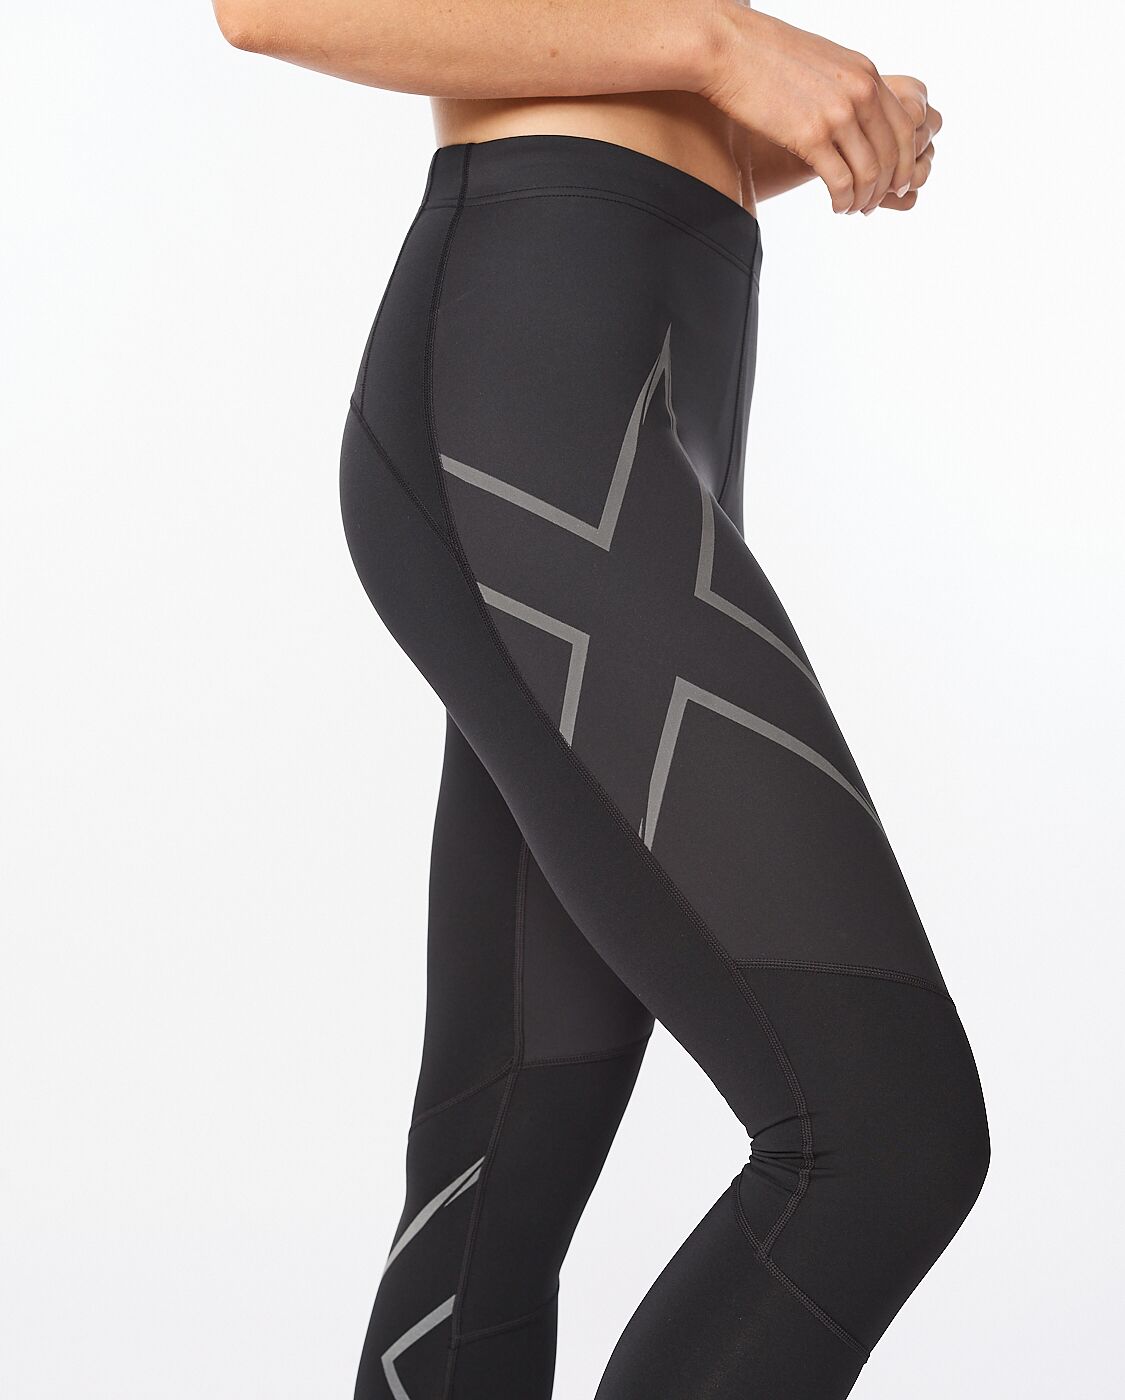  2XU Men's Ignition Shield Compression Tights - Powerful Support  & Warmth - Black/Black Reflective - Size X-Small : Clothing, Shoes & Jewelry